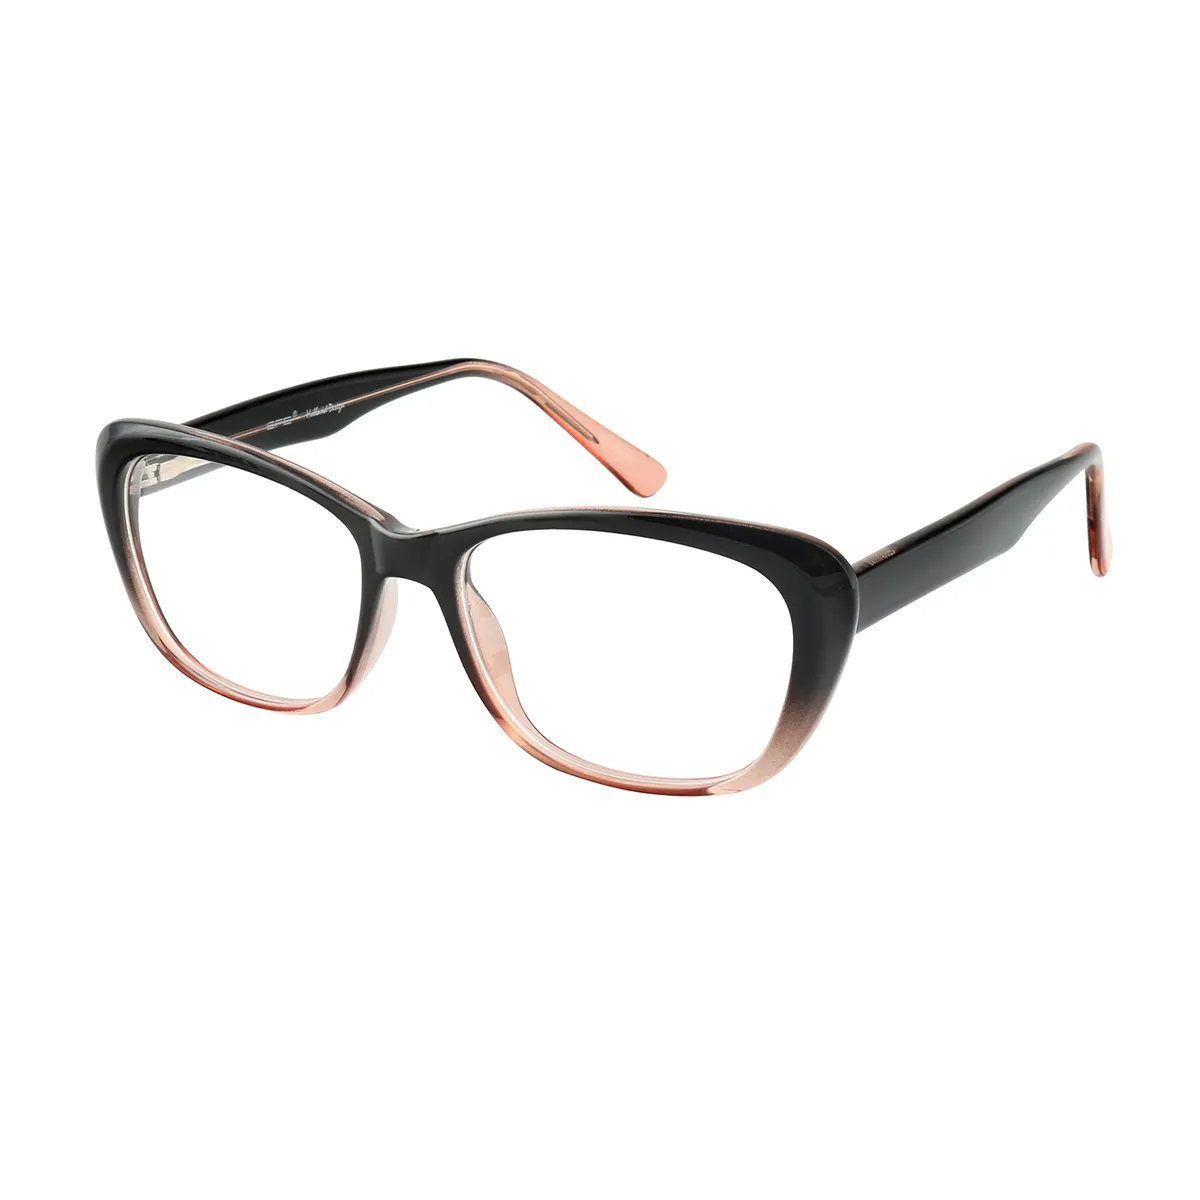 Olivia - Oval Brown Glasses for Women